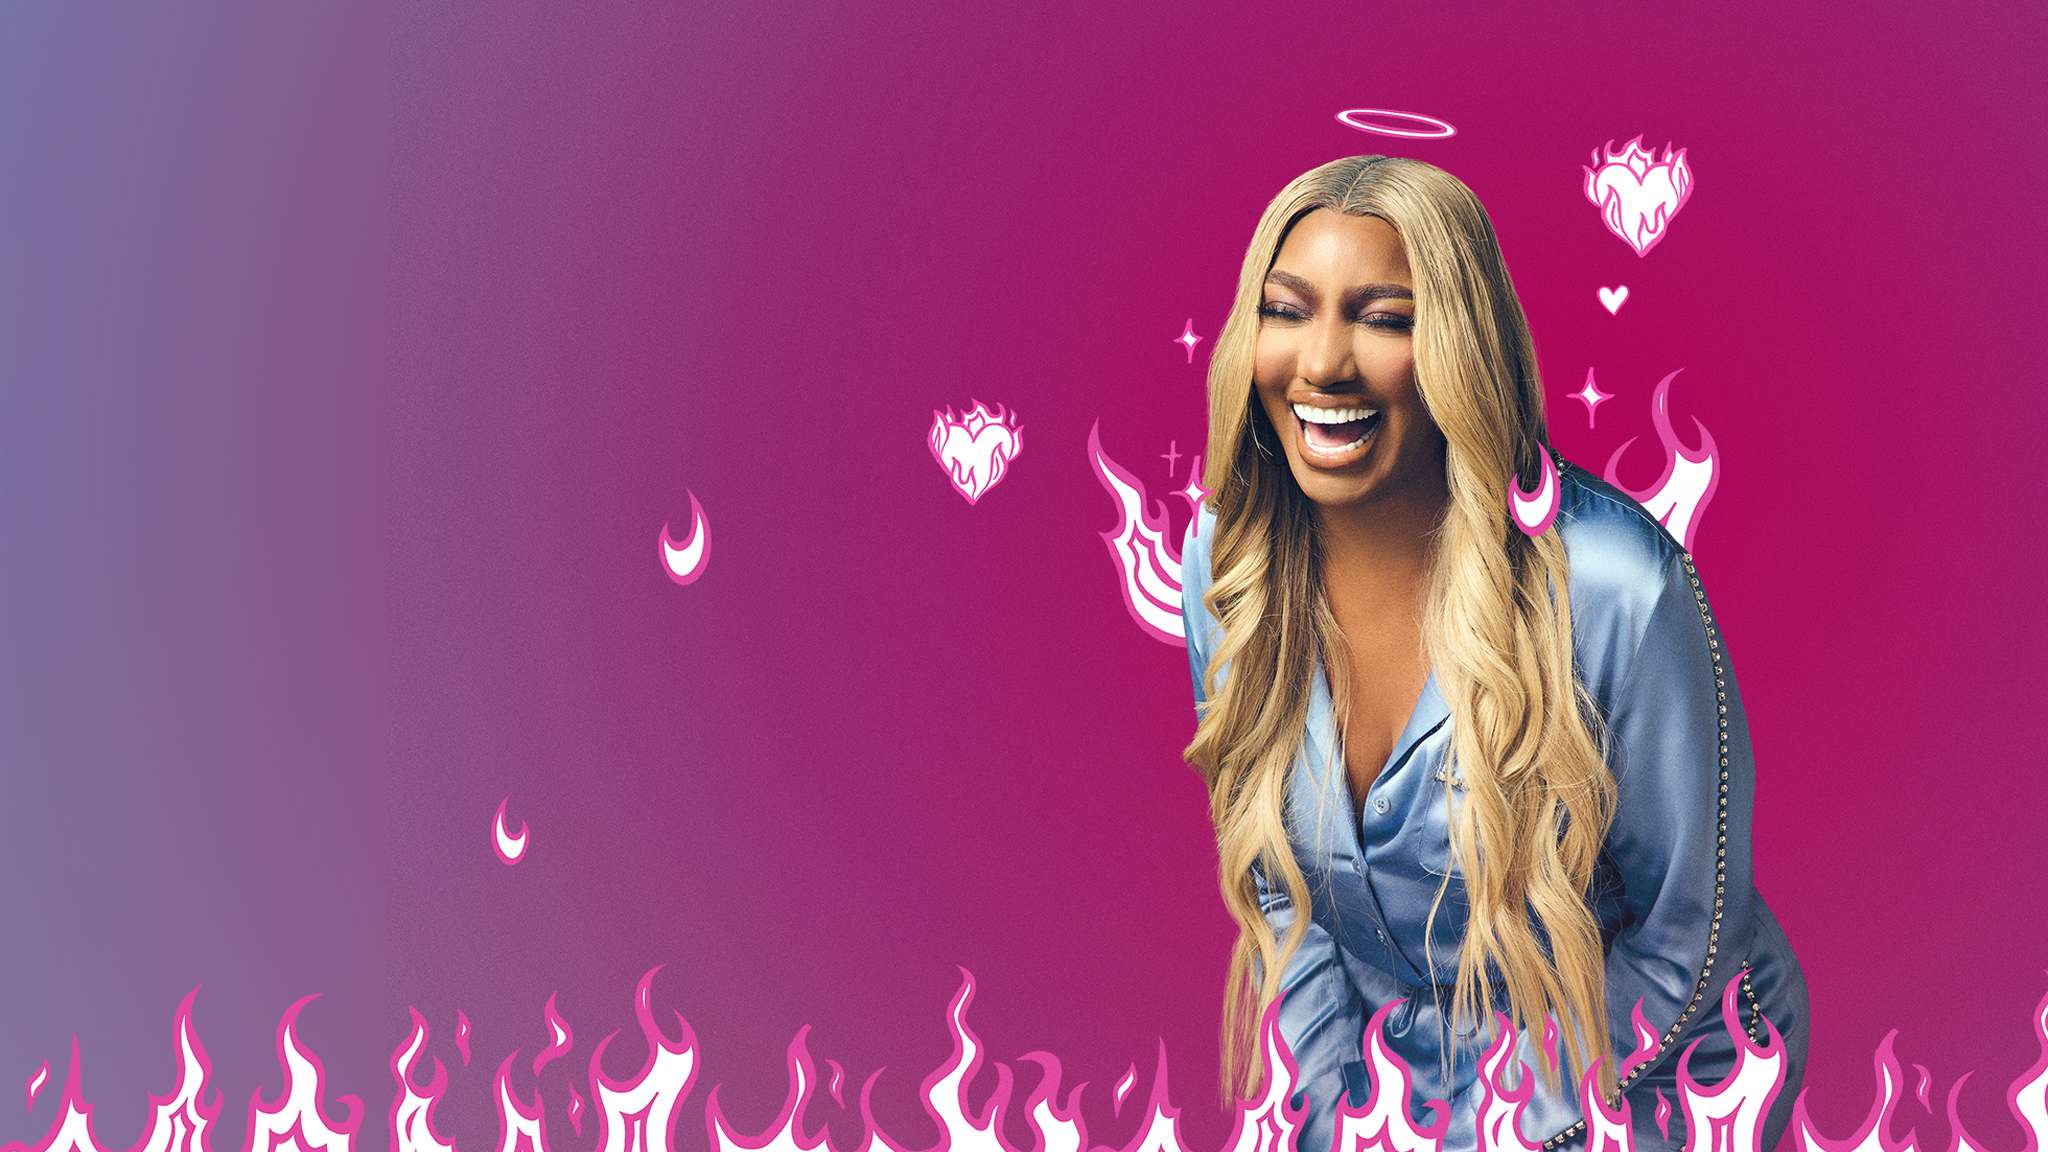 Outrageous Love with NeNe Leakes